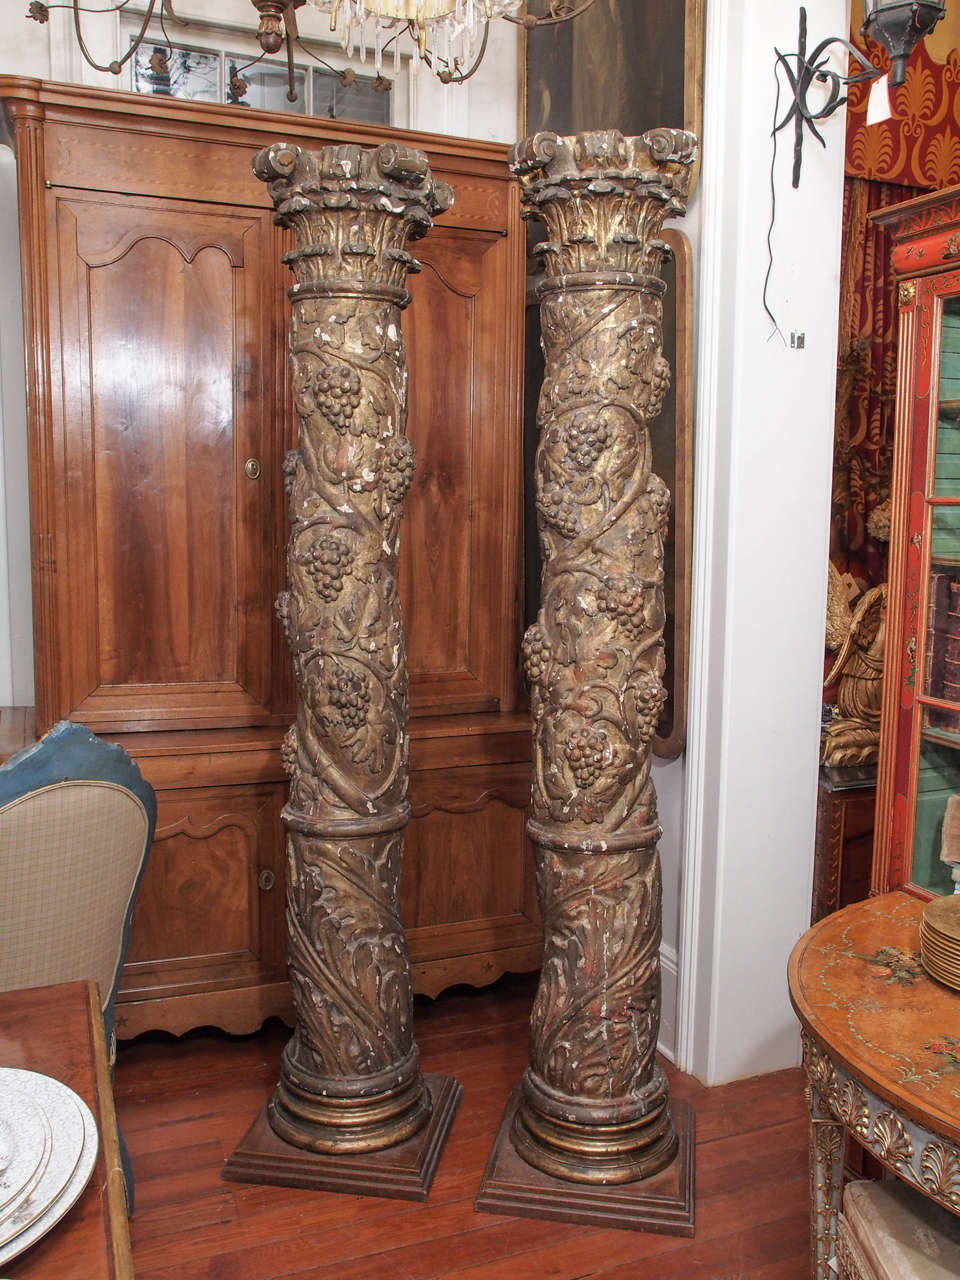 Pair of 17th century solomonic columns carved from an entire tree. 
The reverse is not finished and said tree can be seen.